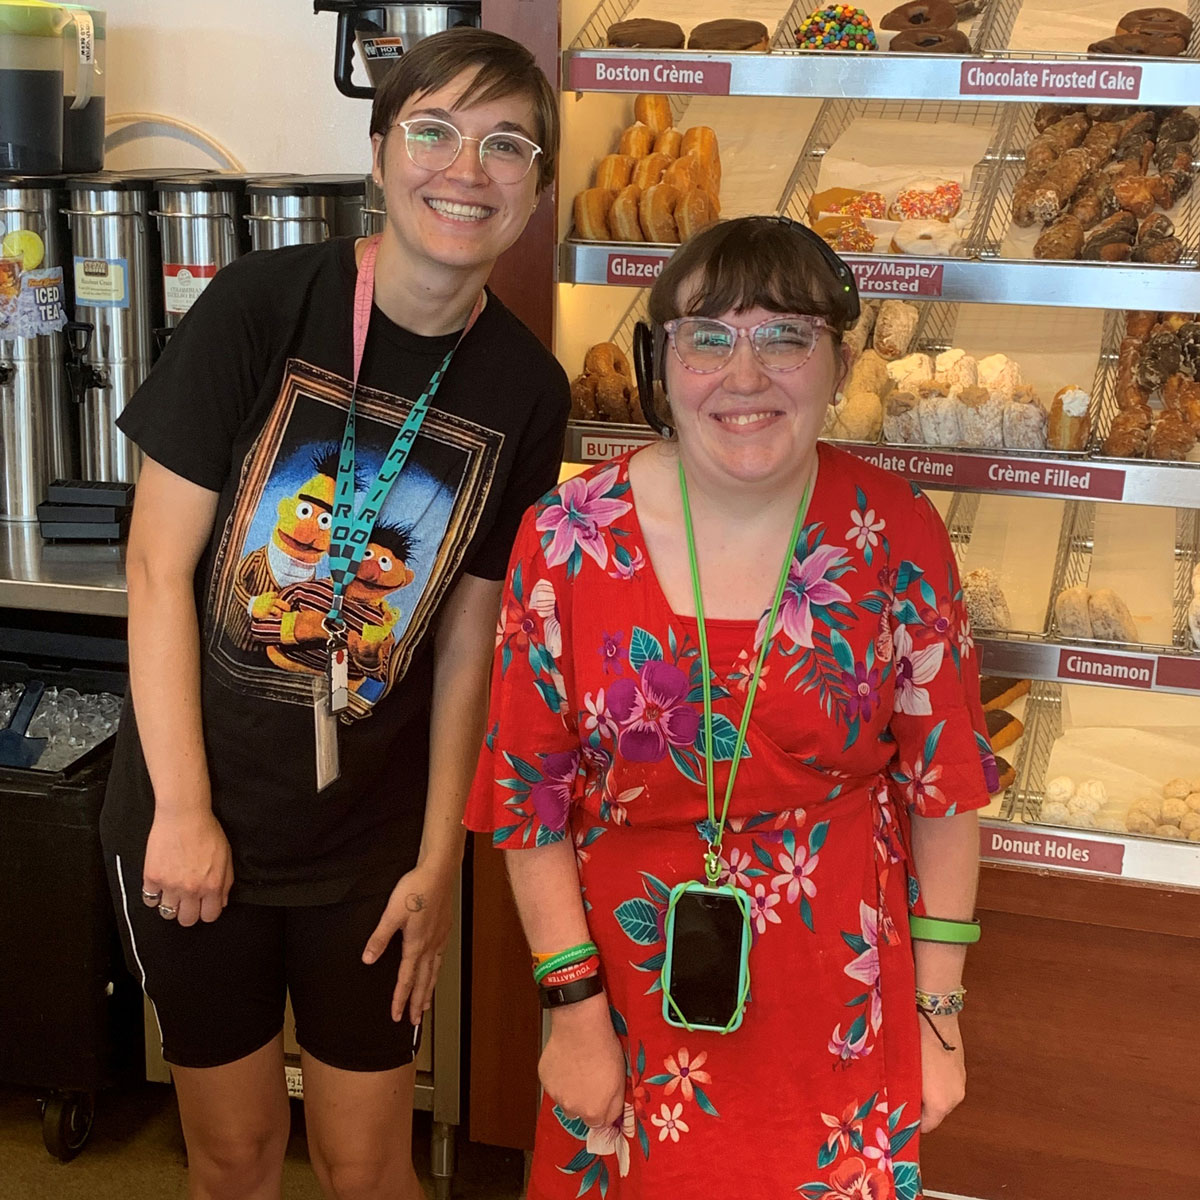 Mikayla and Leslie smiling for a photo in front of the donut shelf at Dunkin Donuts